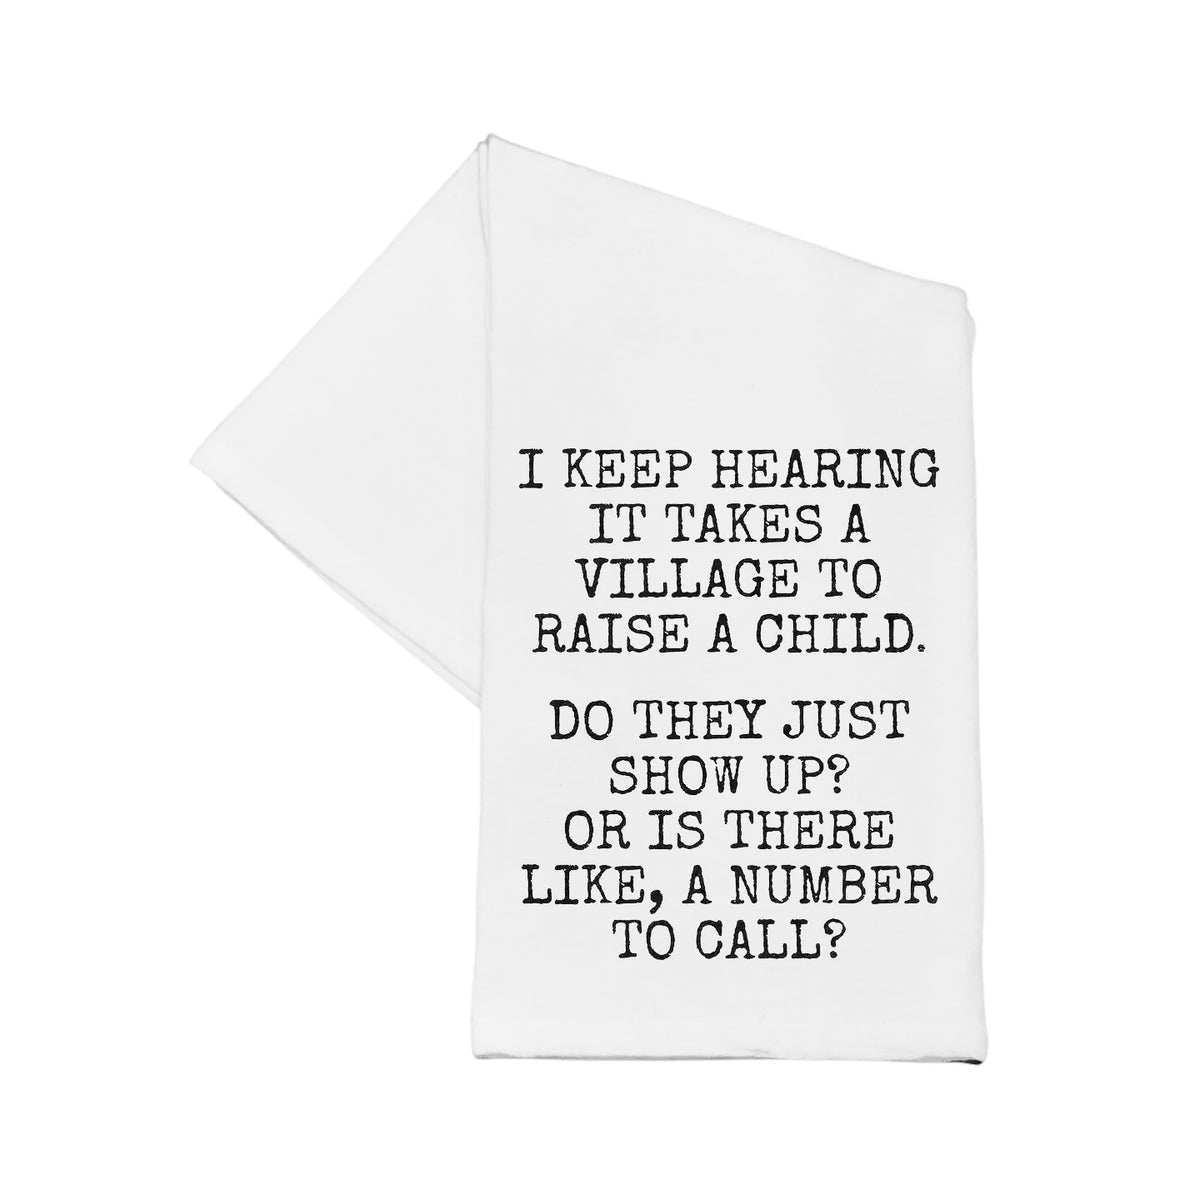 'It Takes A Village To Raise A Child'- Cotton Tea Towel 16x24-It Takes a Village to Raise a Child. Do they just show up? Or is there like, a number to call?-Cali Moon Boutique, Plainville Connecticut